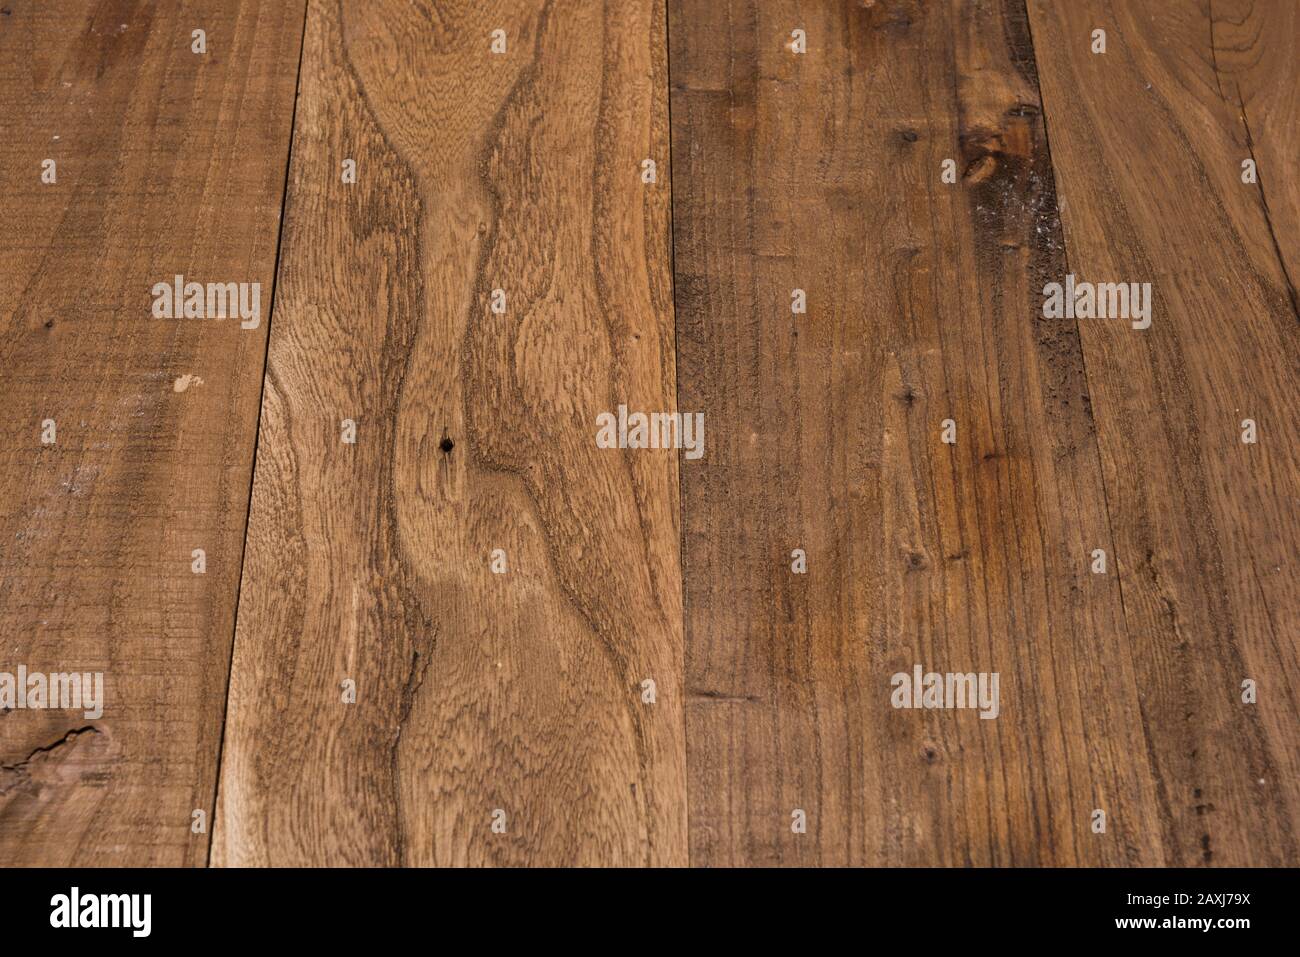 Brown wooden table with perspective white wall in the background Stock Photo